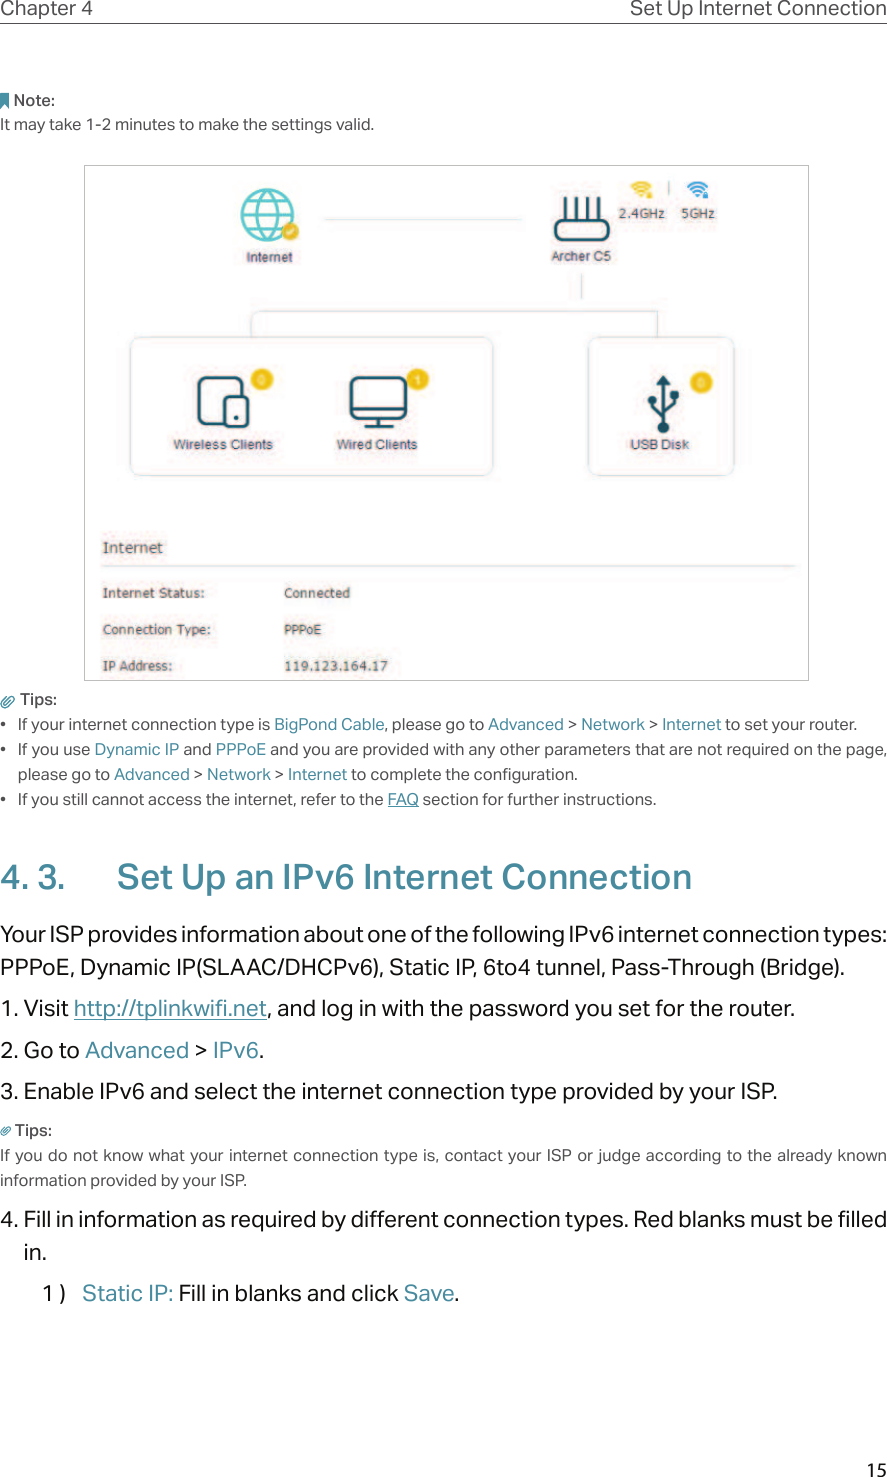 15Chapter 4 Set Up Internet ConnectionNote: It may take 1-2 minutes to make the settings valid. Tips: •  If your internet connection type is BigPond Cable, please go to Advanced &gt; Network &gt; Internet to set your router.•  If you use Dynamic IP and PPPoE and you are provided with any other parameters that are not required on the page, please go to Advanced &gt; Network &gt; Internet to complete the configuration.•  If you still cannot access the internet, refer to the FAQ section for further instructions.4. 3.  Set Up an IPv6 Internet ConnectionYour ISP provides information about one of the following IPv6 internet connection types: PPPoE, Dynamic IP(SLAAC/DHCPv6), Static IP, 6to4 tunnel, Pass-Through (Bridge).1. Visit http://tplinkwifi.net, and log in with the password you set for the router.2. Go to Advanced &gt; IPv6. 3. Enable IPv6 and select the internet connection type provided by your ISP.Tips:If you do not know what your internet connection type is, contact your ISP  or judge according to the already known information provided by your ISP.4. Fill in information as required by different connection types. Red blanks must be filled in.1 )  Static IP: Fill in blanks and click Save.